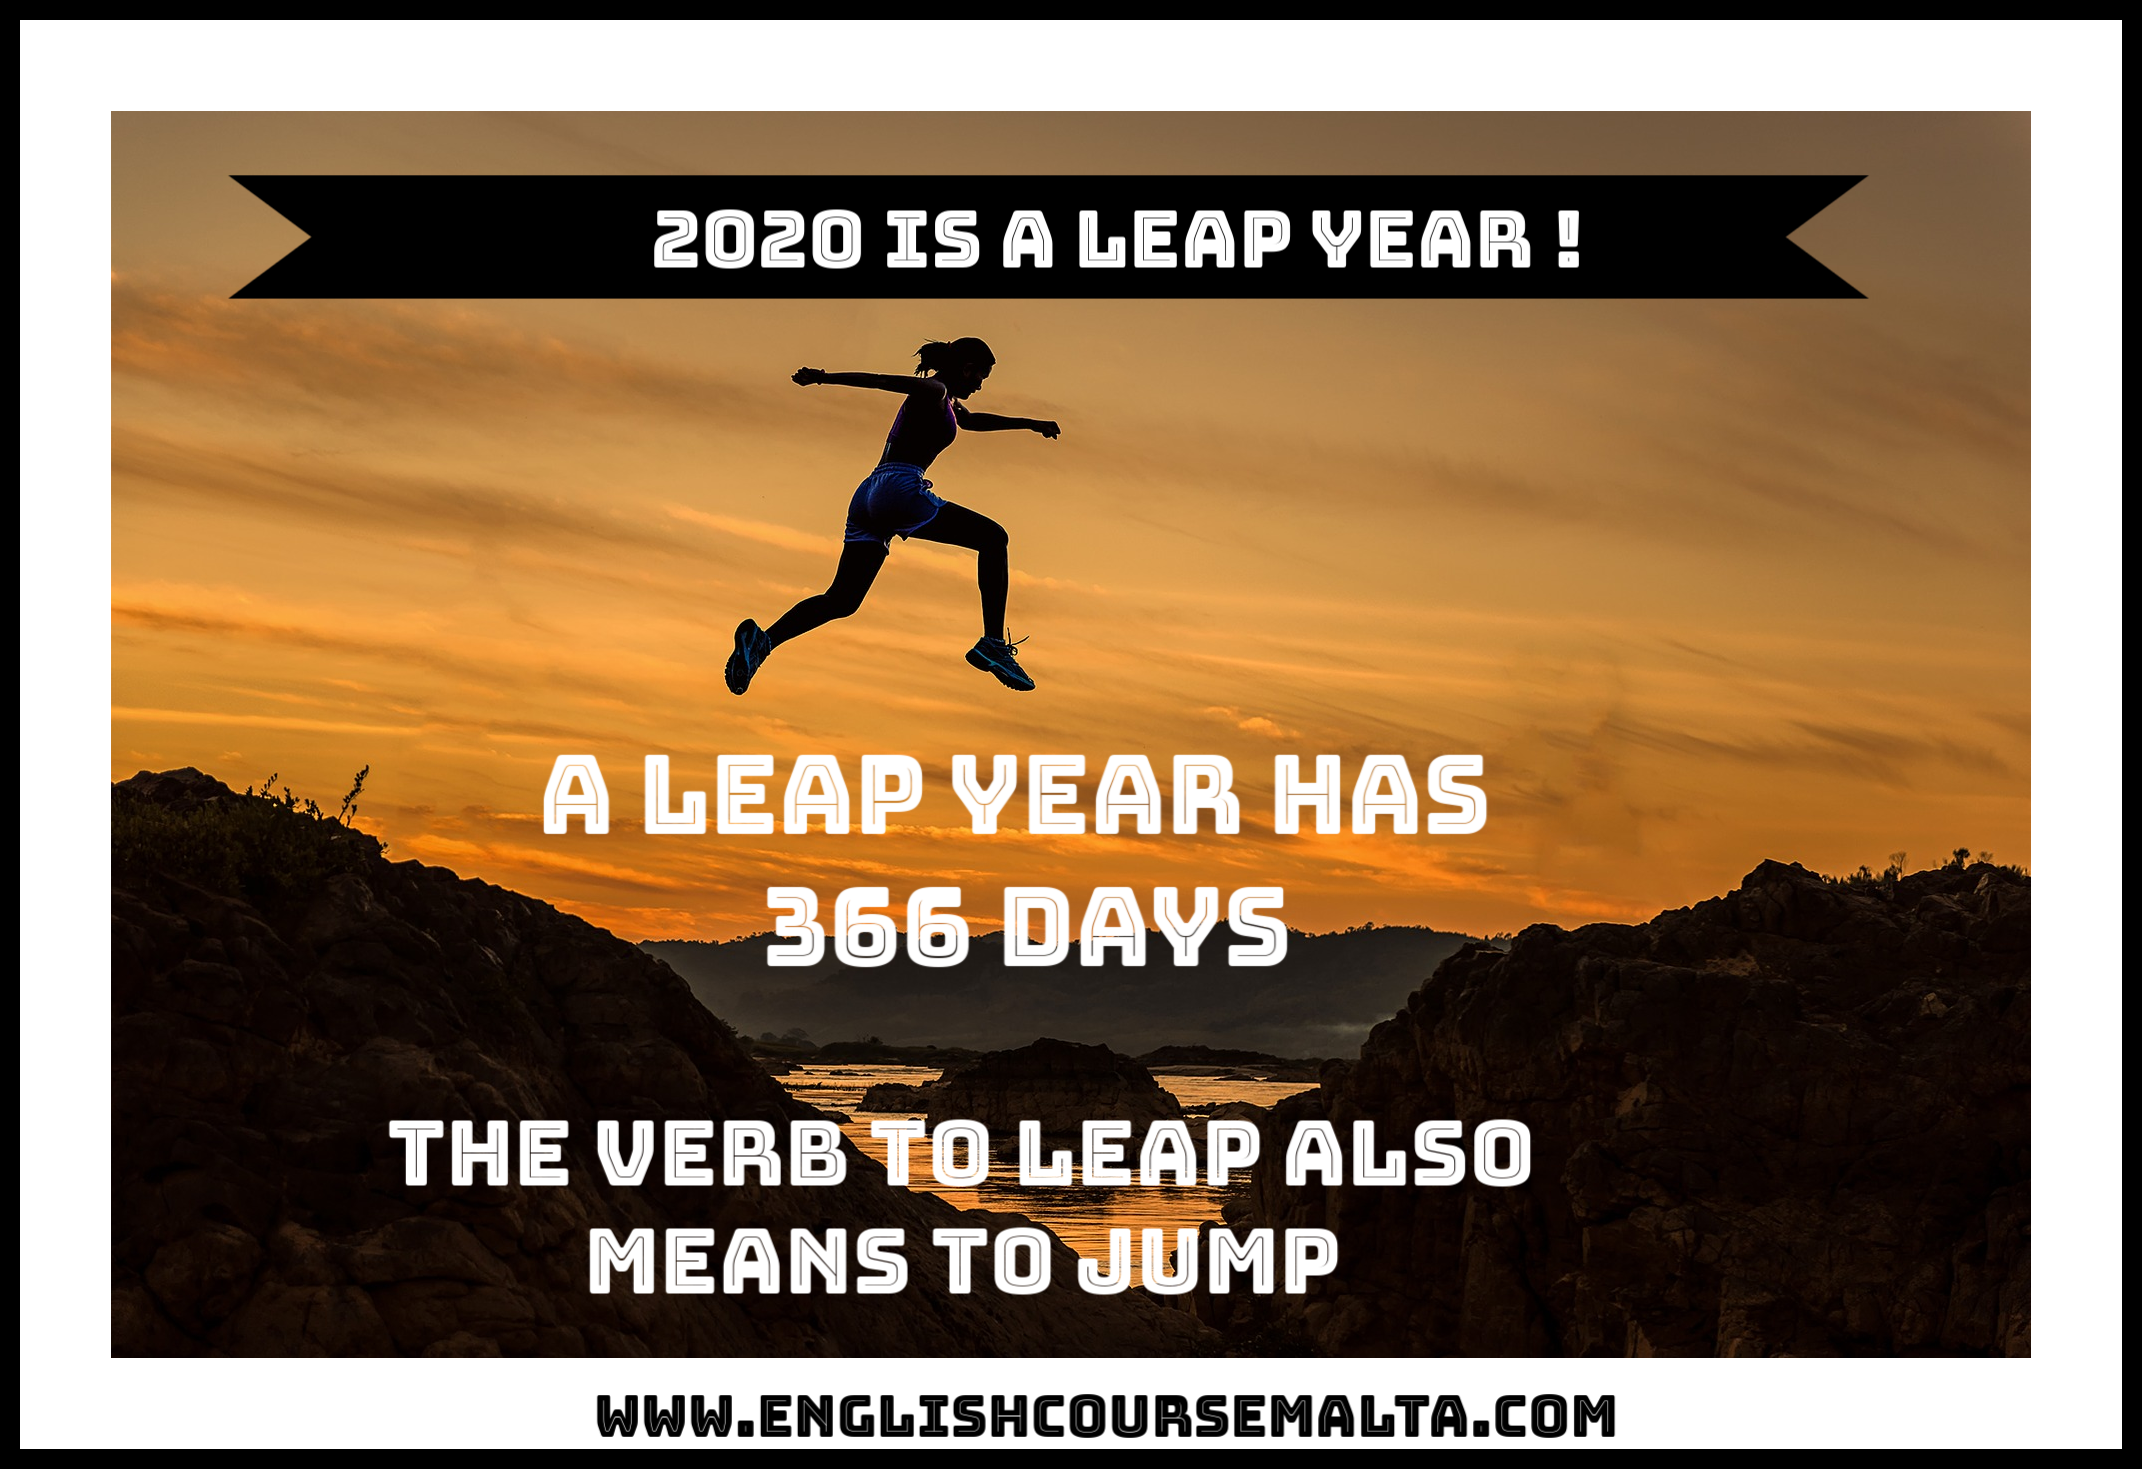 2020-is-a-leap-year-english-course-malta